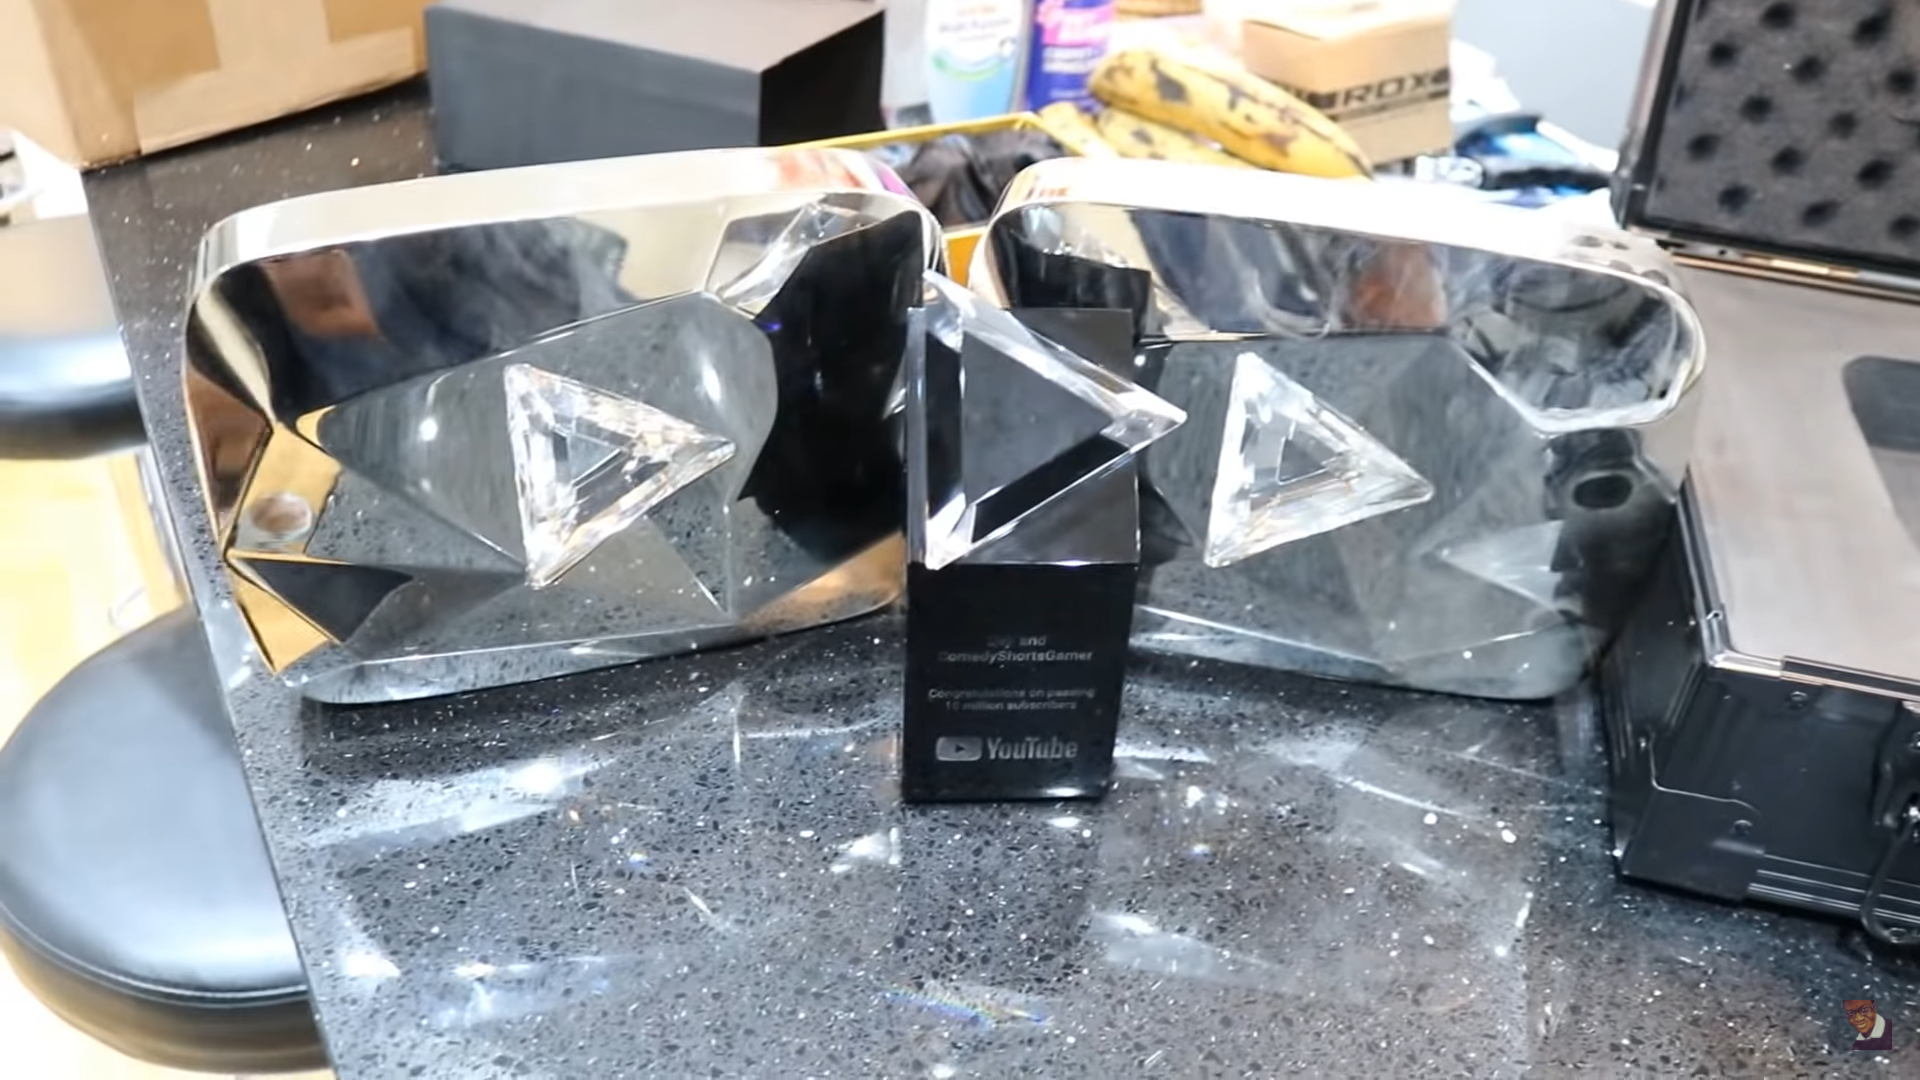 Deji got 2 Diamond Play Buttons and a Special Reward with one channel, are you mad Jack he's coming for you